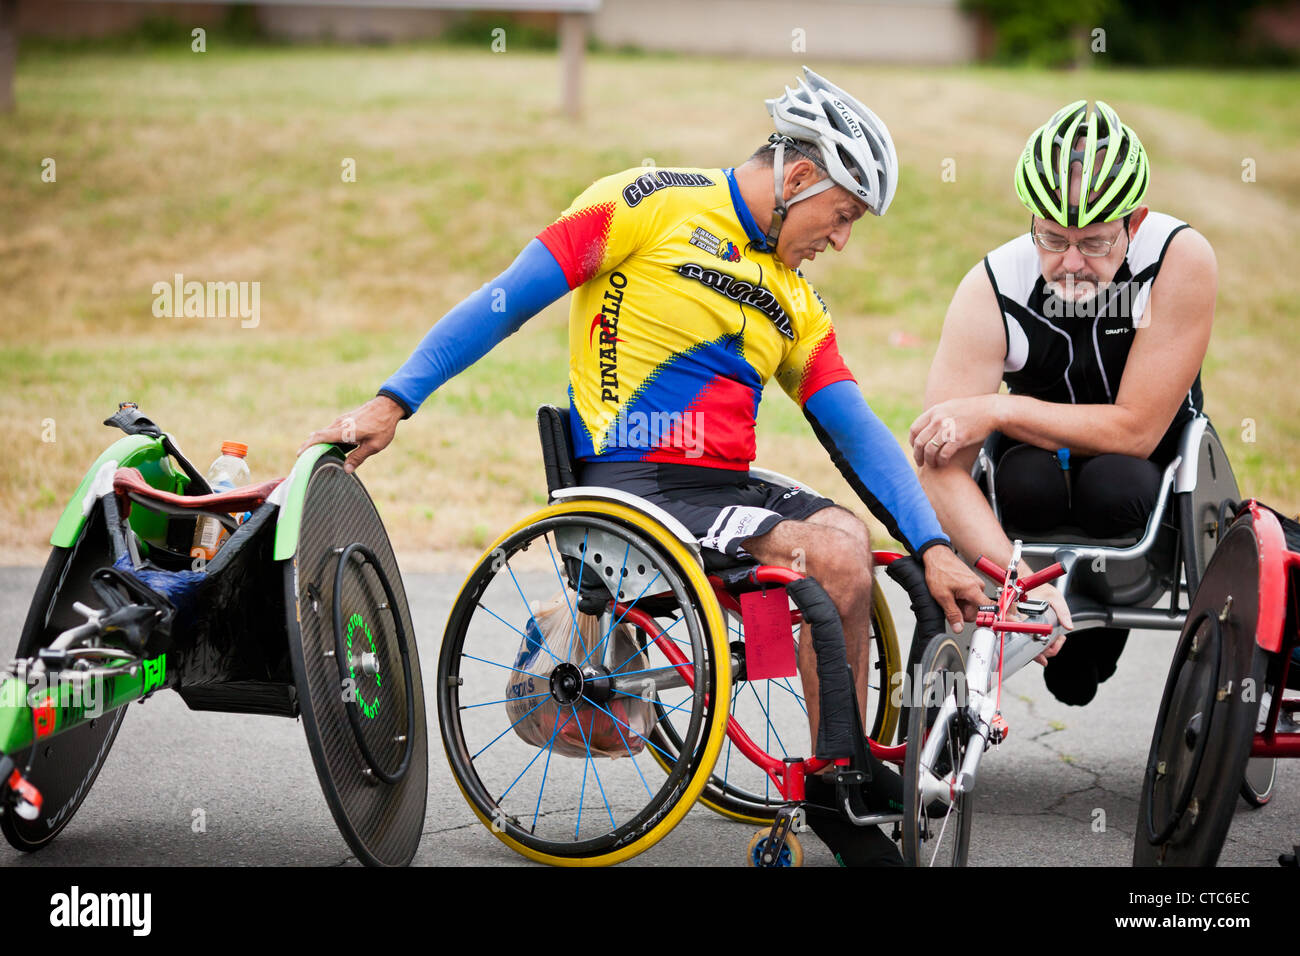 Wheelchair division, annual Boilermaker 15K Road race, largest in USA, Utica New York. Stock Photo